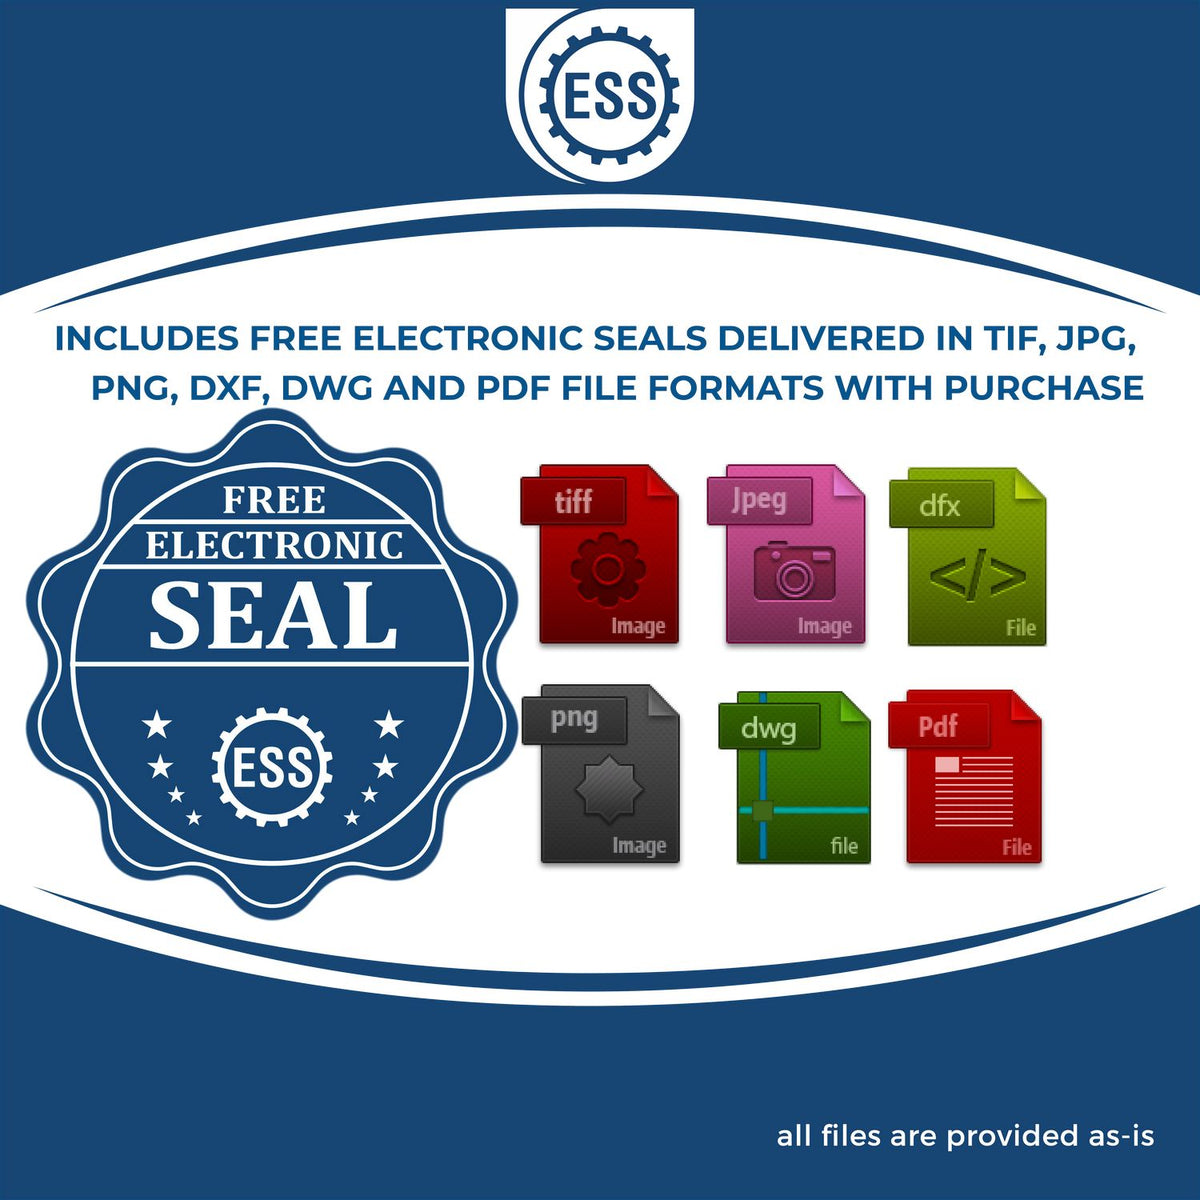 An infographic for the free electronic seal for the Slim Pre-Inked Pennsylvania Professional Engineer Seal Stamp illustrating the different file type icons such as DXF, DWG, TIF, JPG and PNG.